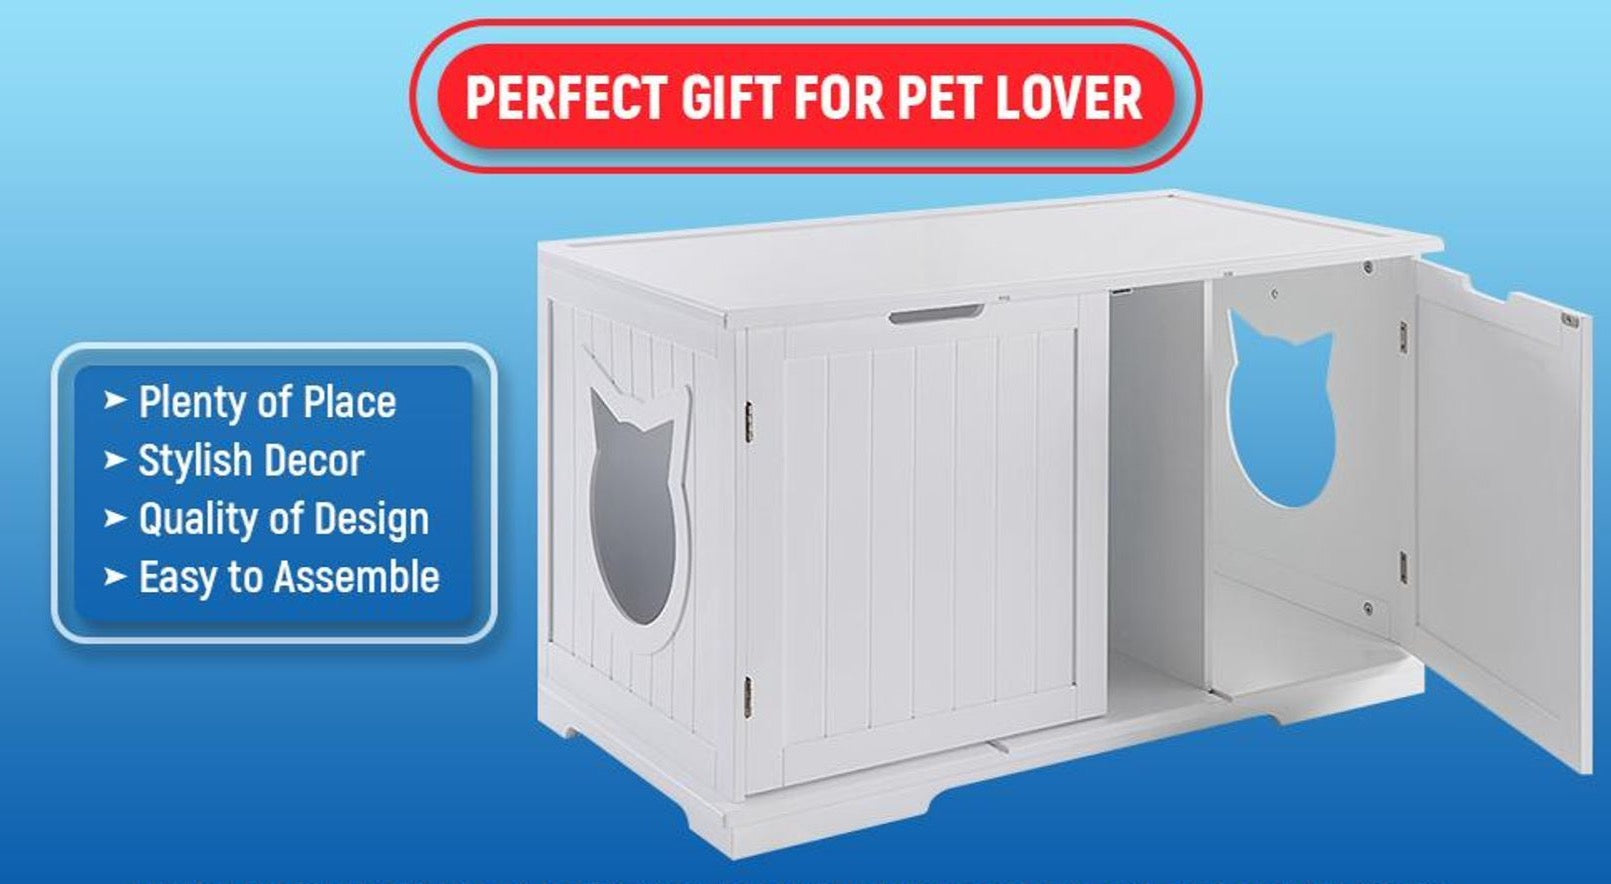 X-Large Cat Multi-Functional End Table - White - Madison's Mutt Mall